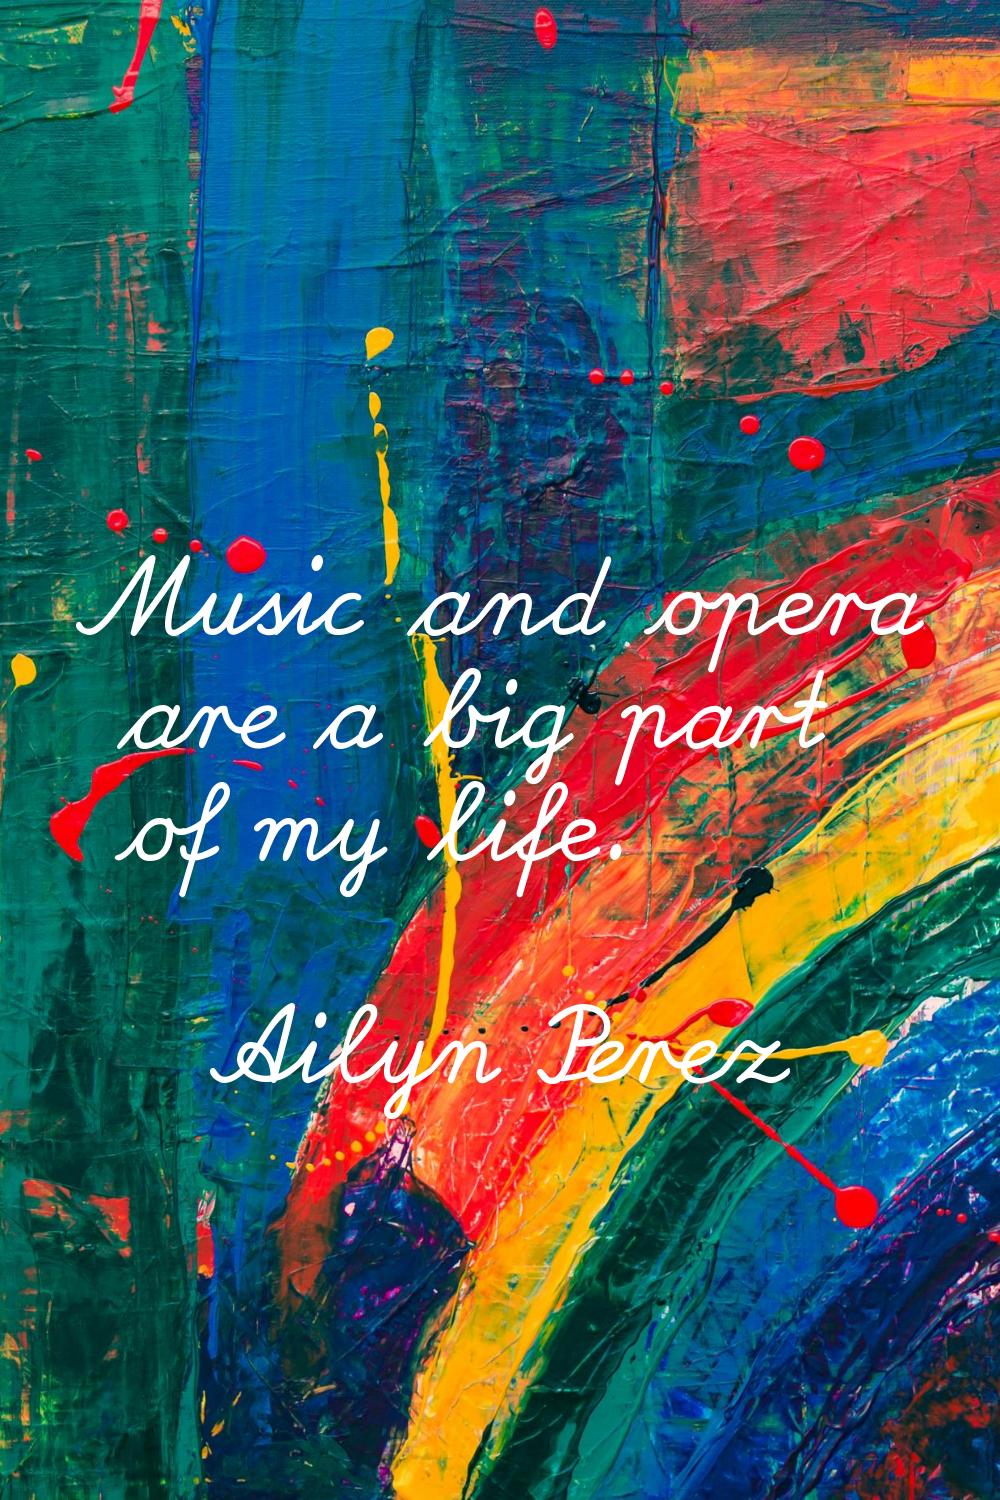 Music and opera are a big part of my life.